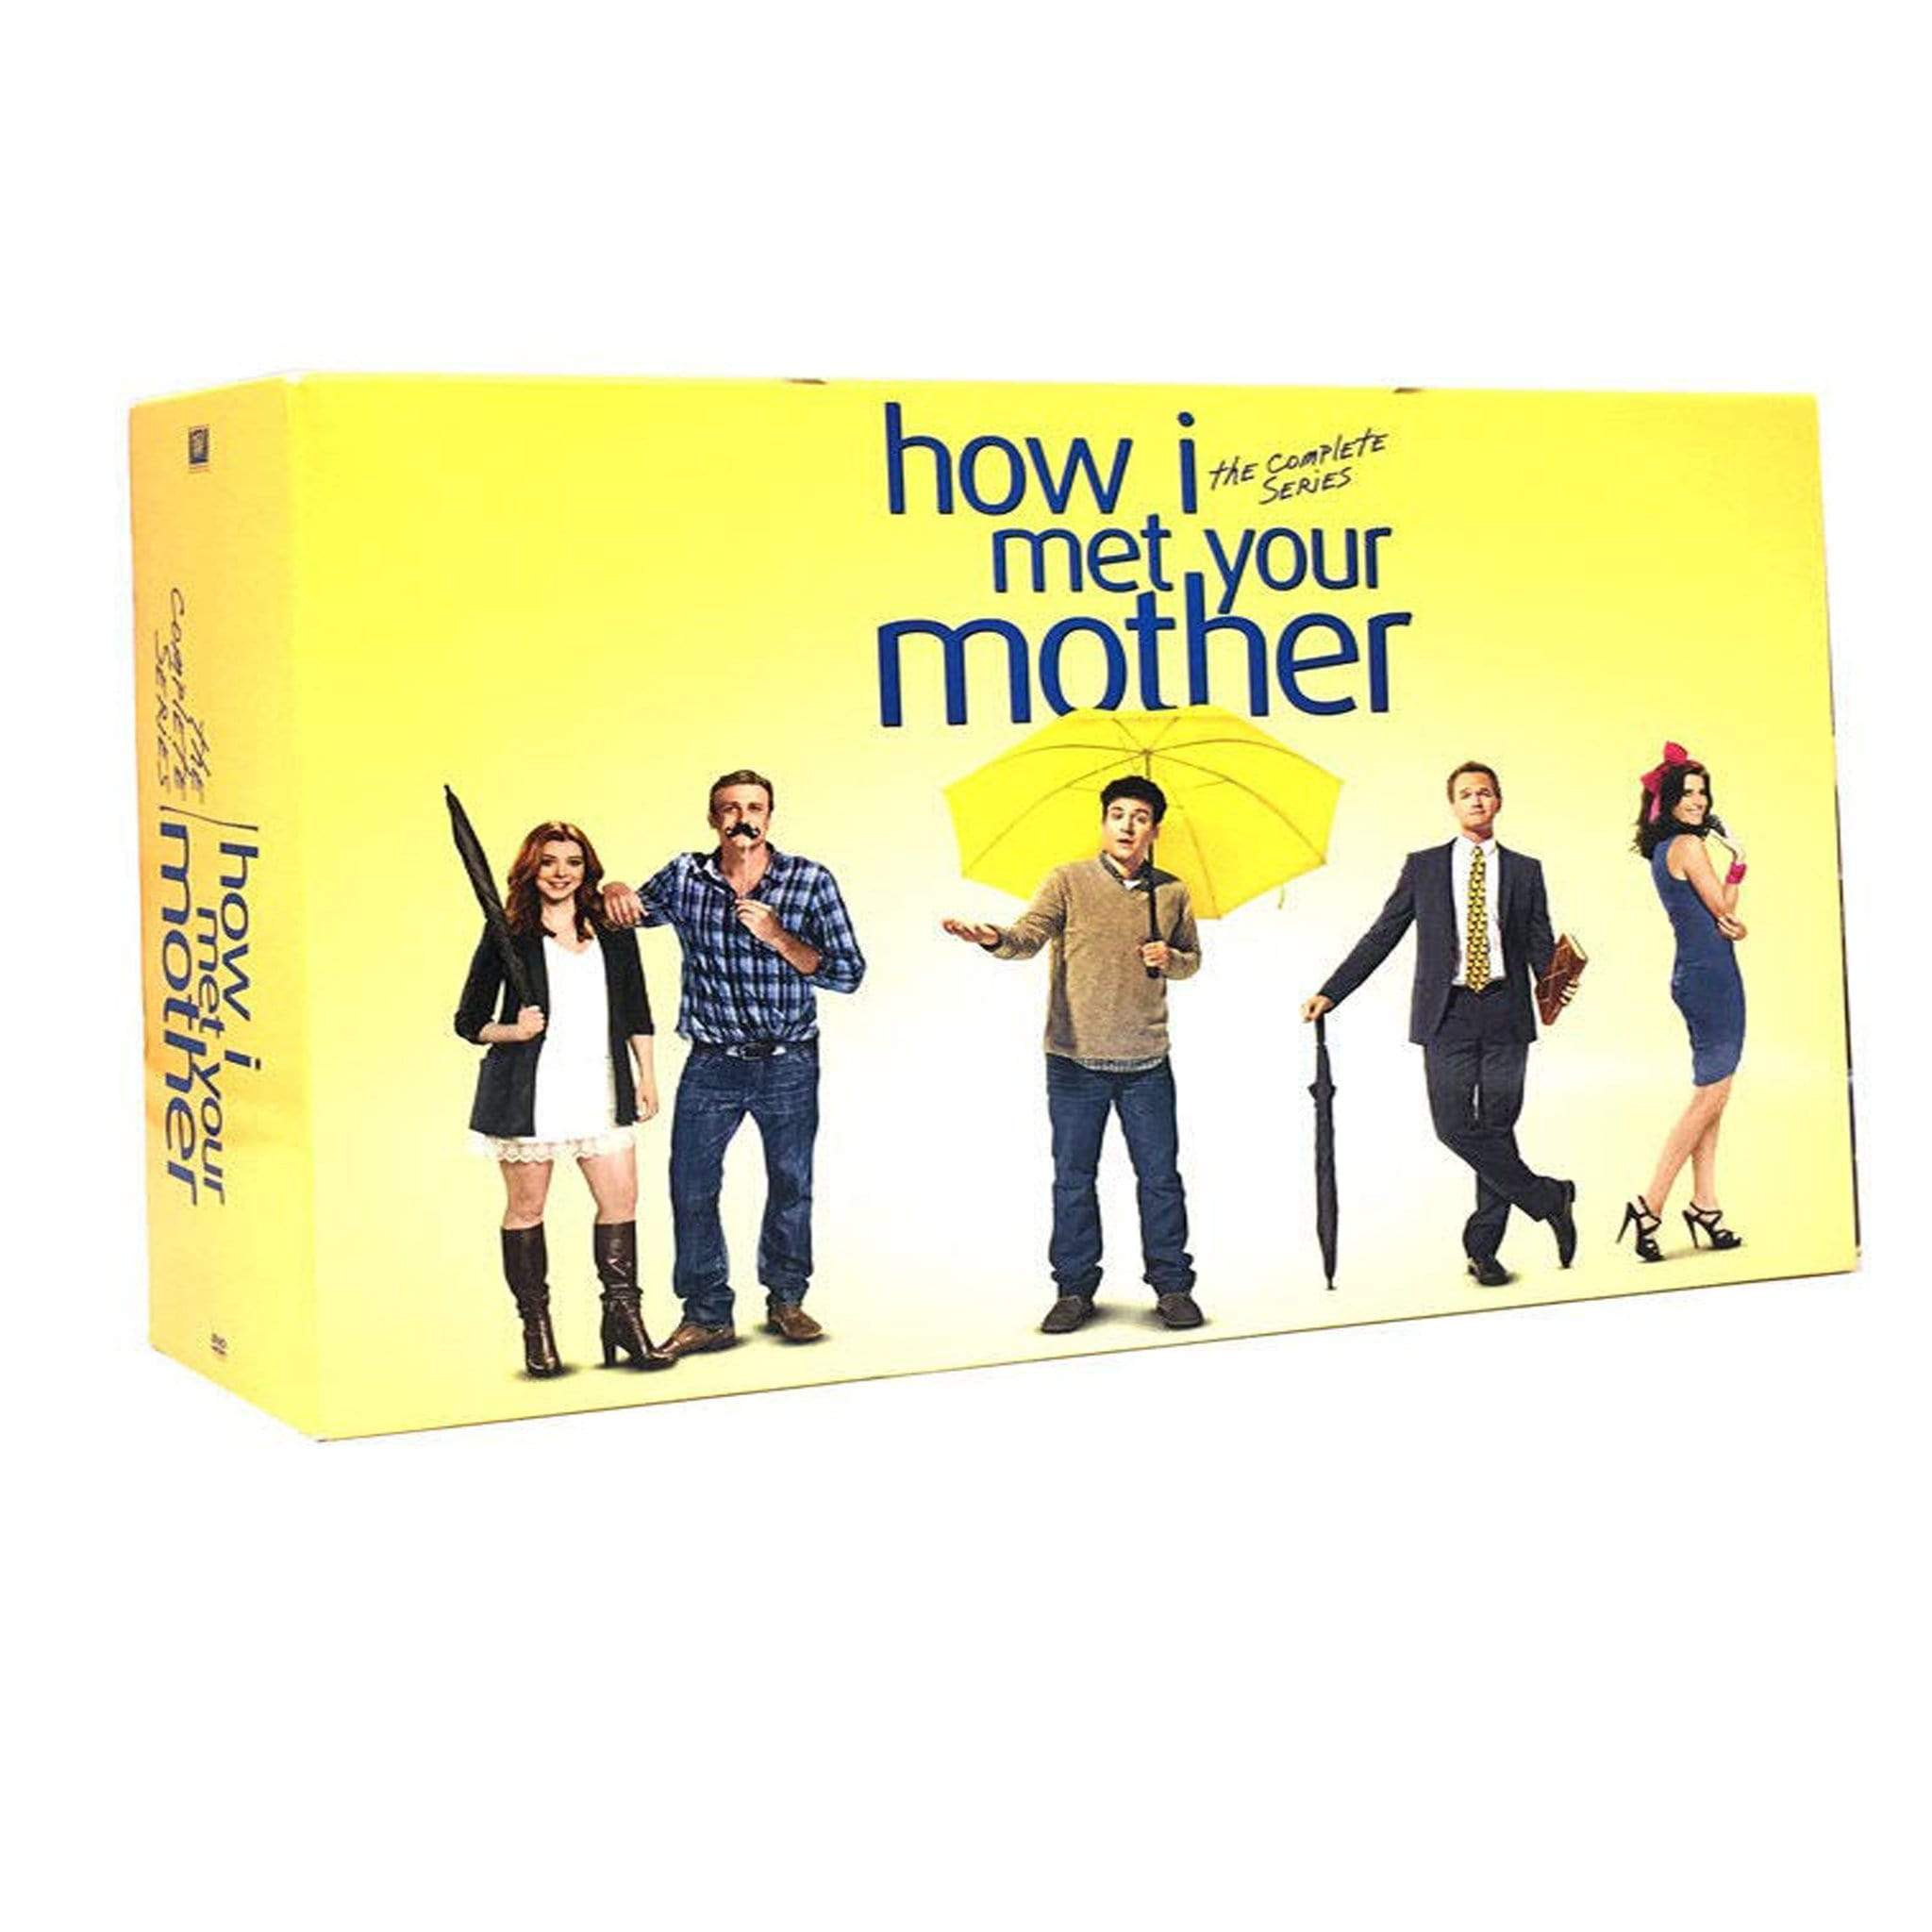 How I Met Your Mother DVD Complete Series Box Set 20th Century Fox DVDs & Blu-ray Discs > DVDs > Box Sets